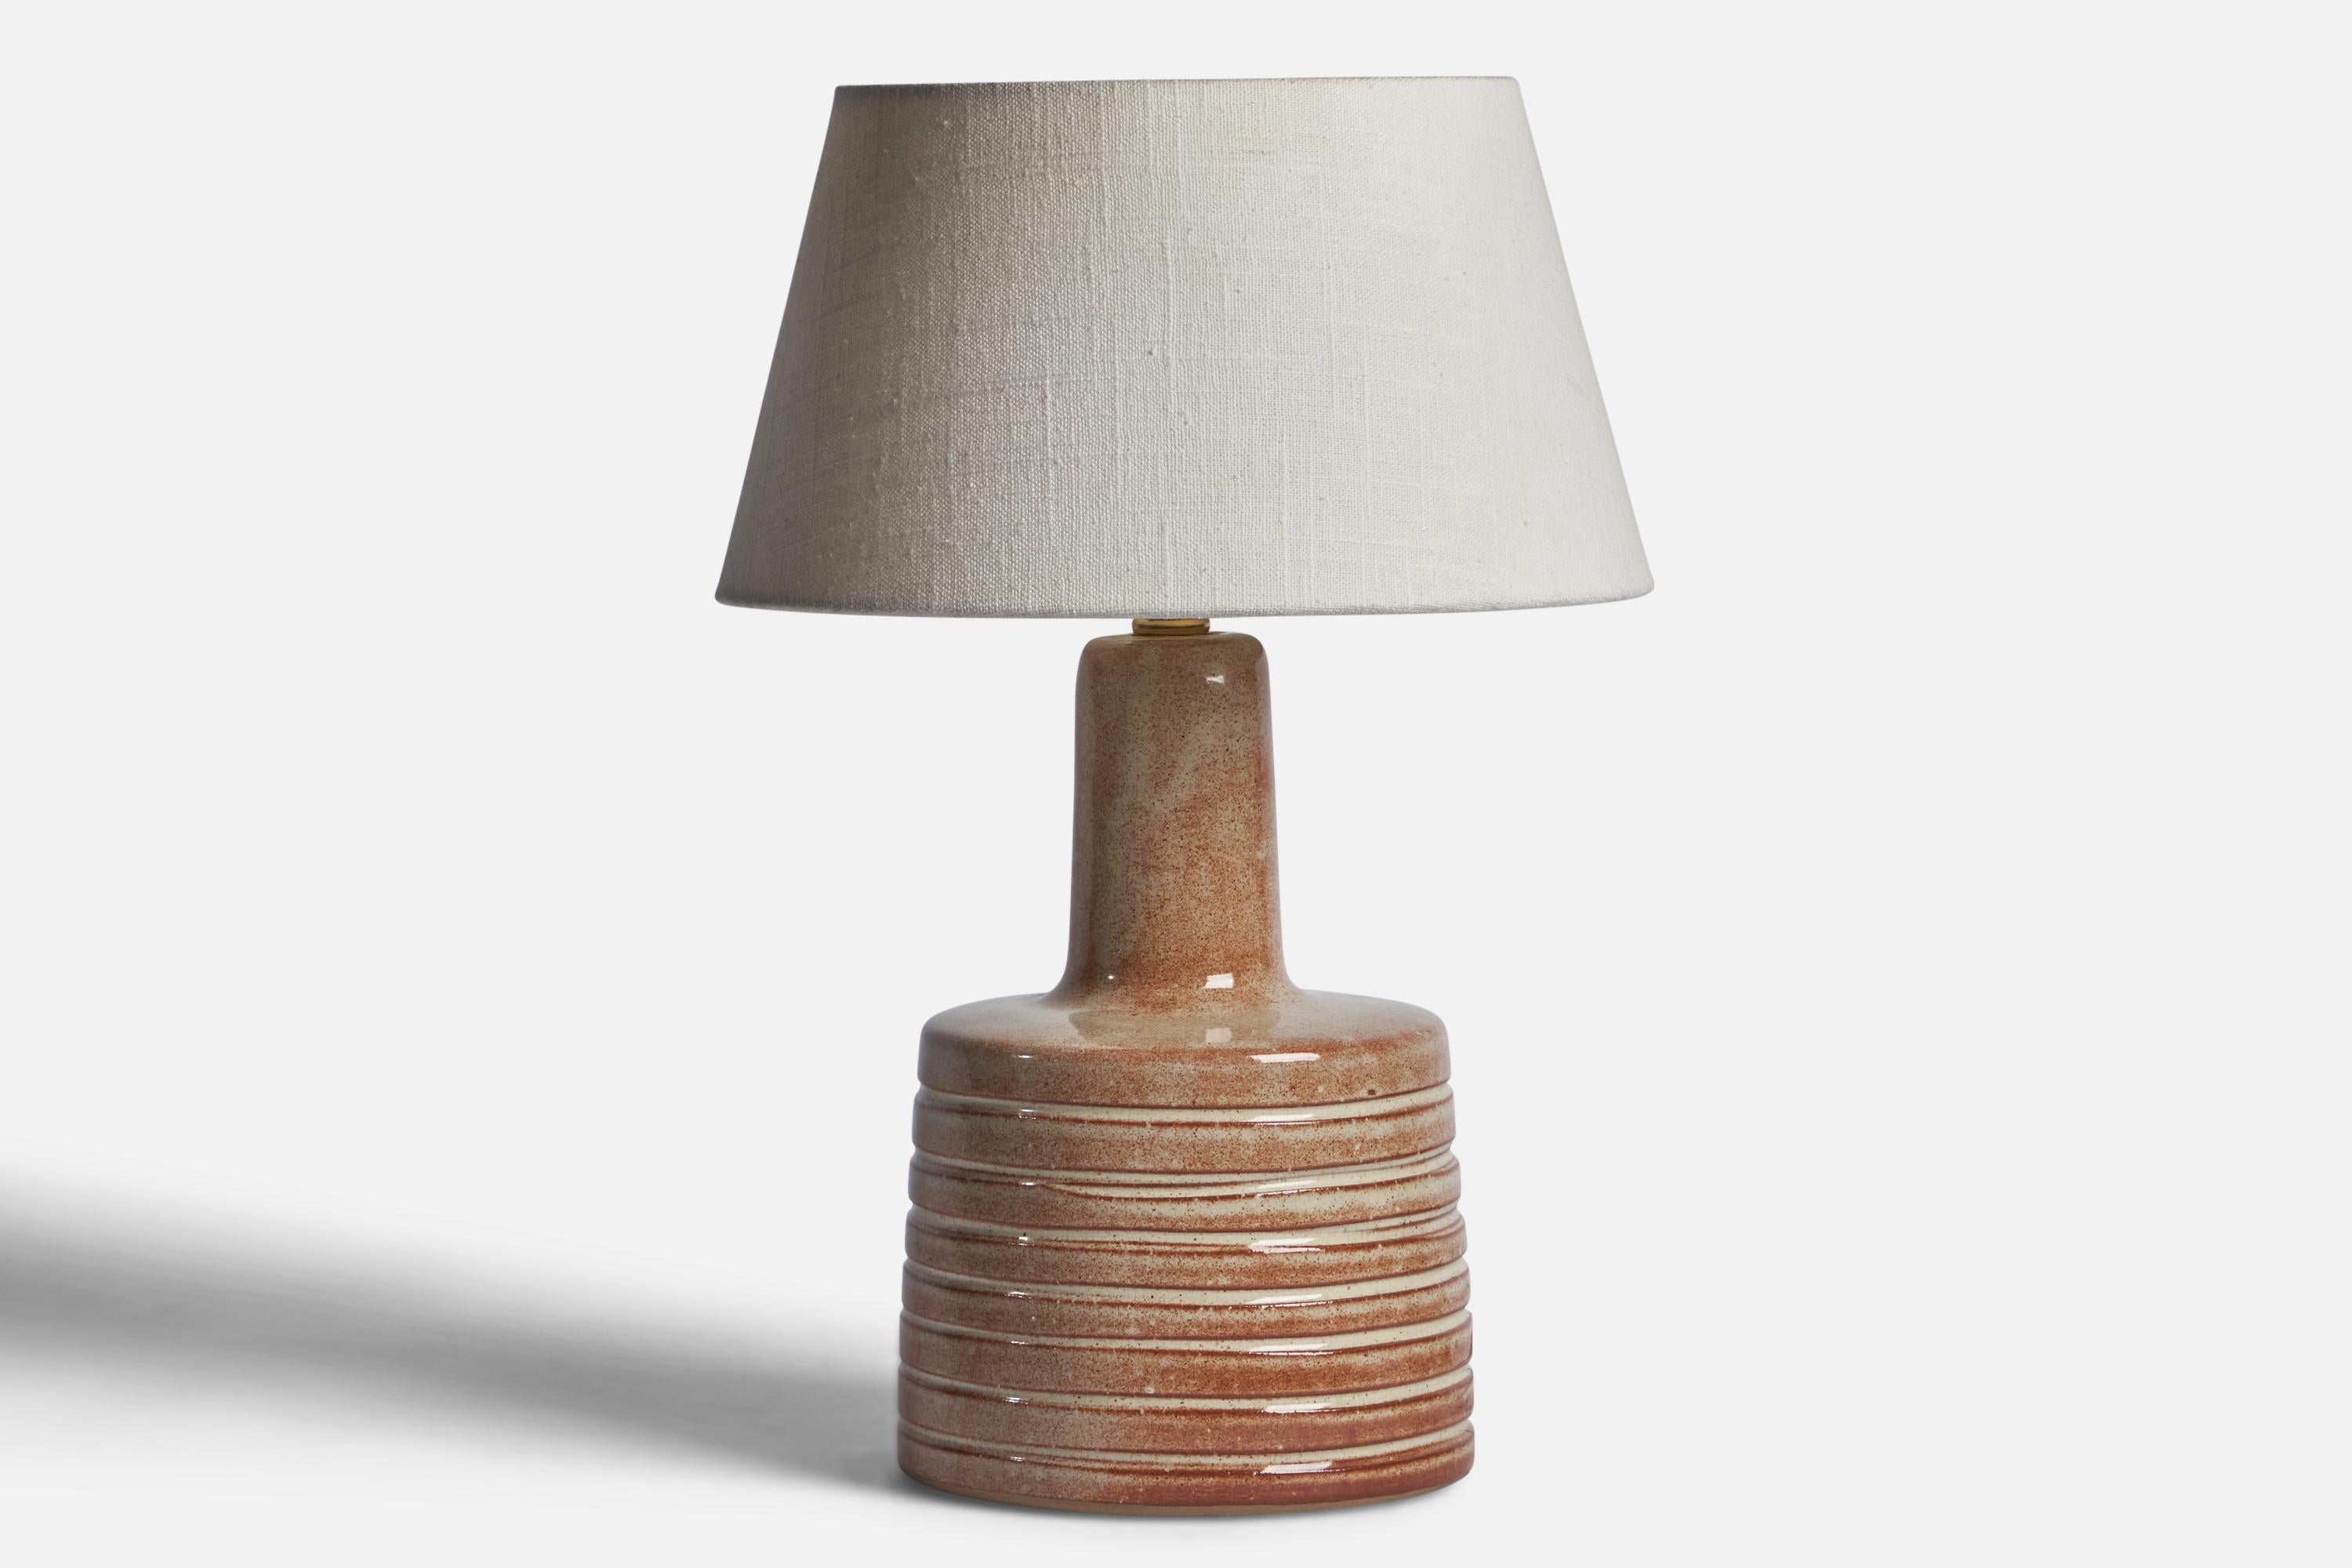 A beige and red-glazed ceramic table lamp designed by Jane & Gordon Martz and produced by Marshall Studios, USA, 1960s.

Dimensions of Lamp (inches): 12” H x 6.05” Diameter
Dimensions of Shade (inches): 7” Top Diameter x 10” Bottom Diameter x 5.5” H